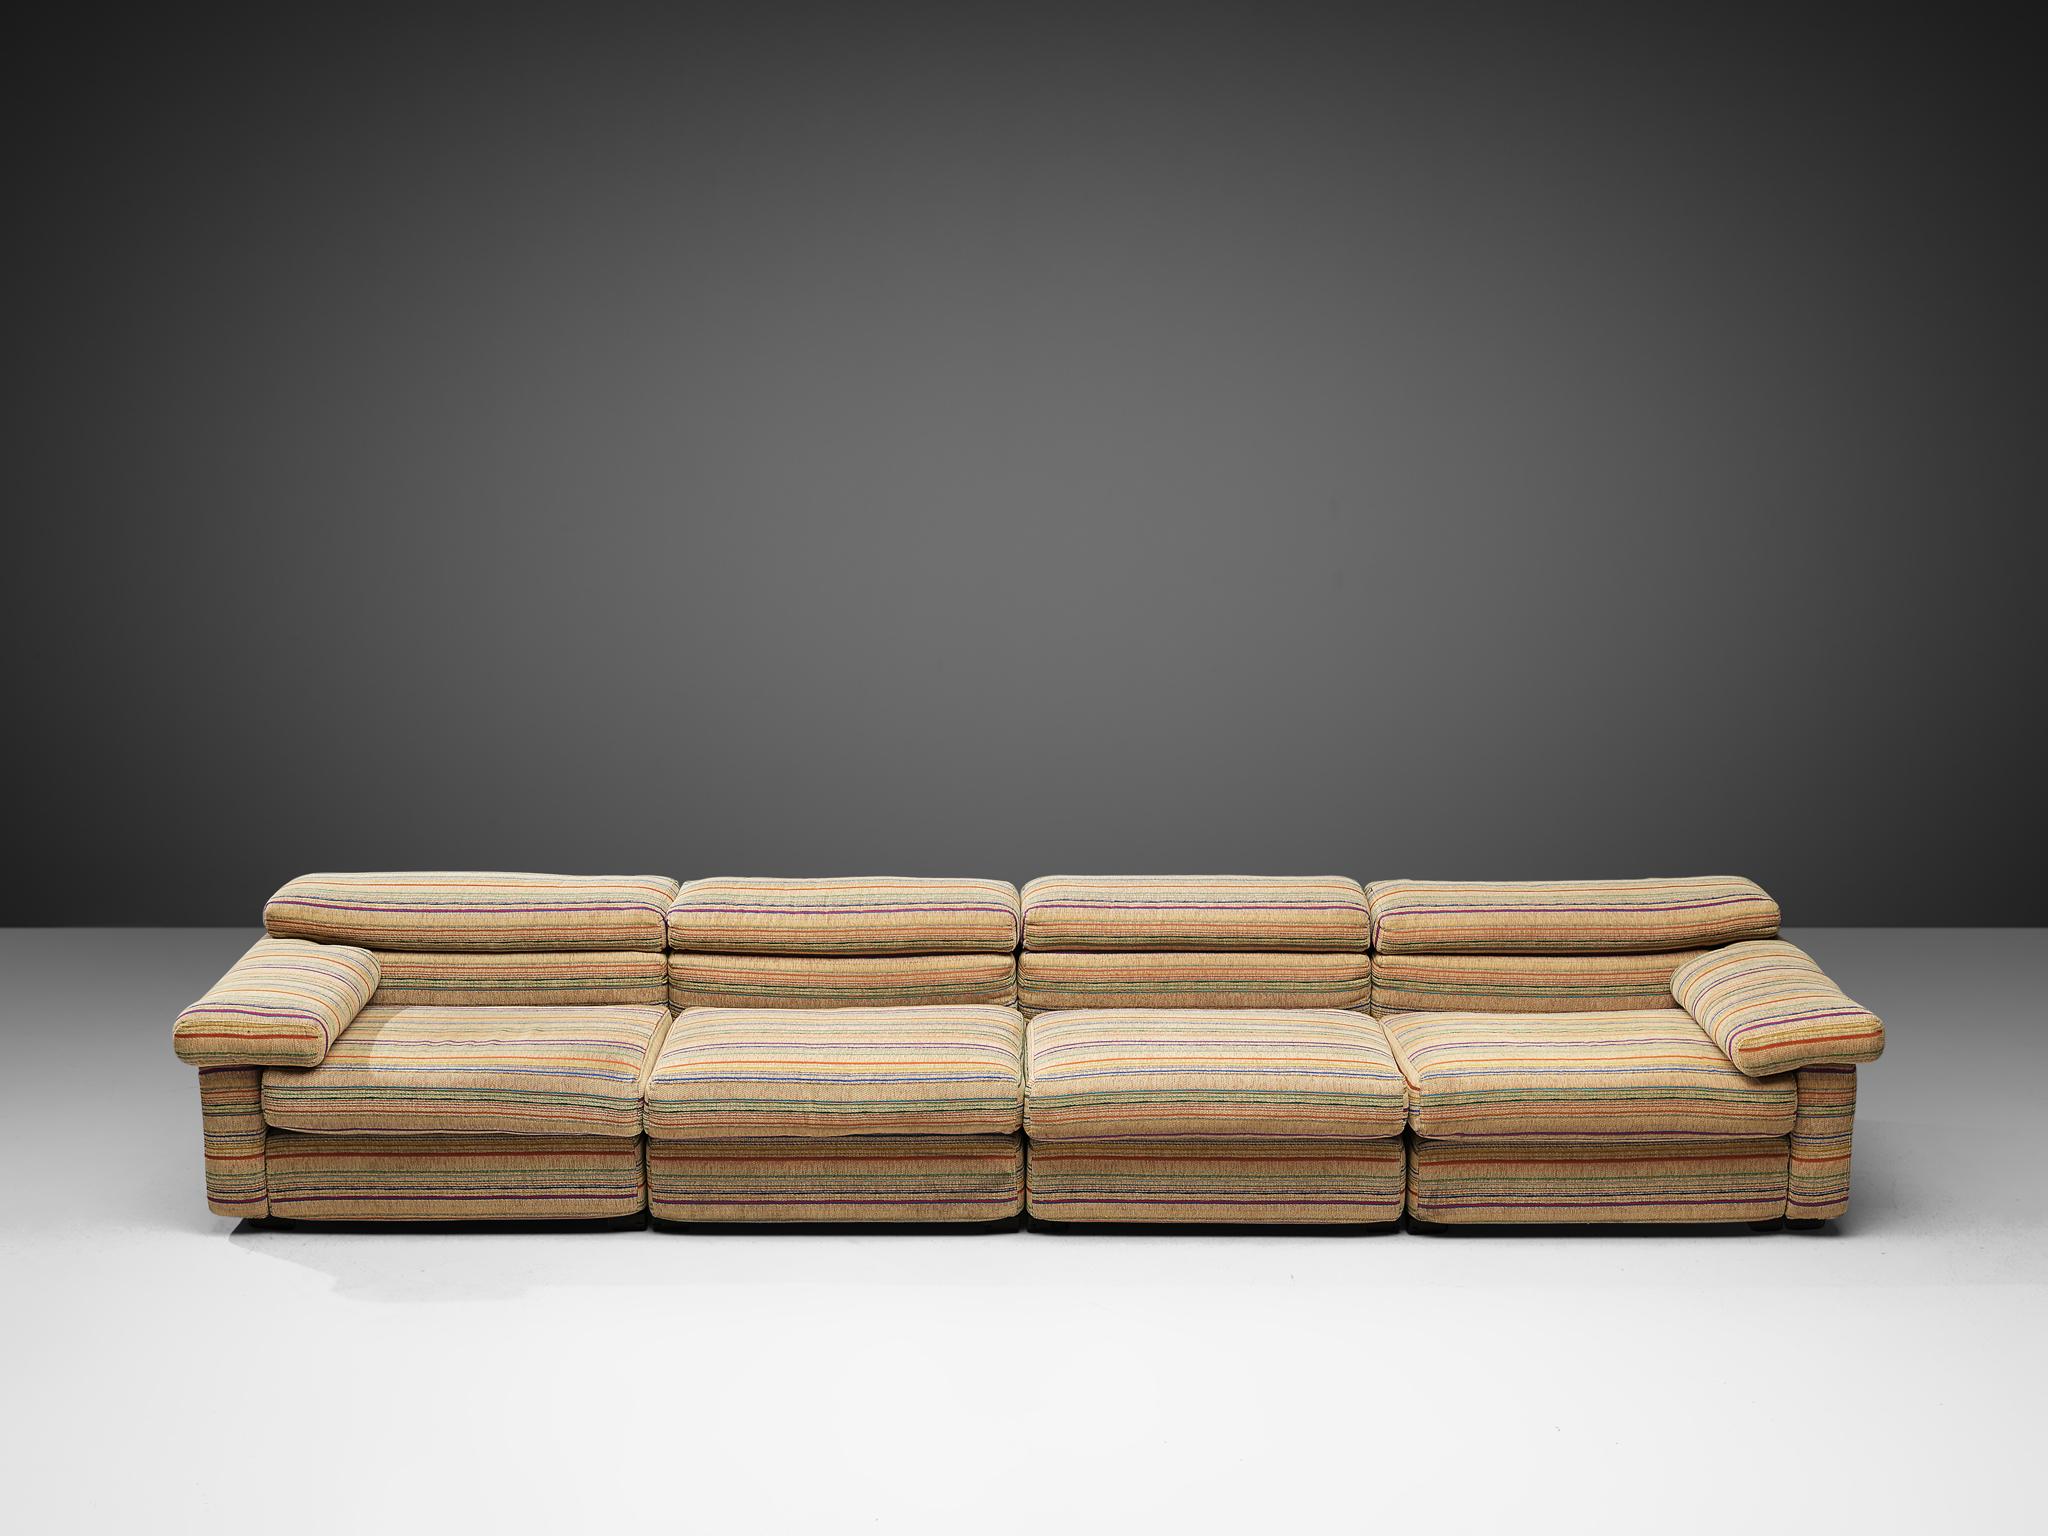 Afra & Tobia Scarpa for B&B, 'Erasmo' sectional sofa, fabric, Italy, 1970s

This high quality modular sofa consists of four elements. The design is bulky though simplistic and very comfortable. The sofa is grand and wide, thus it offers a